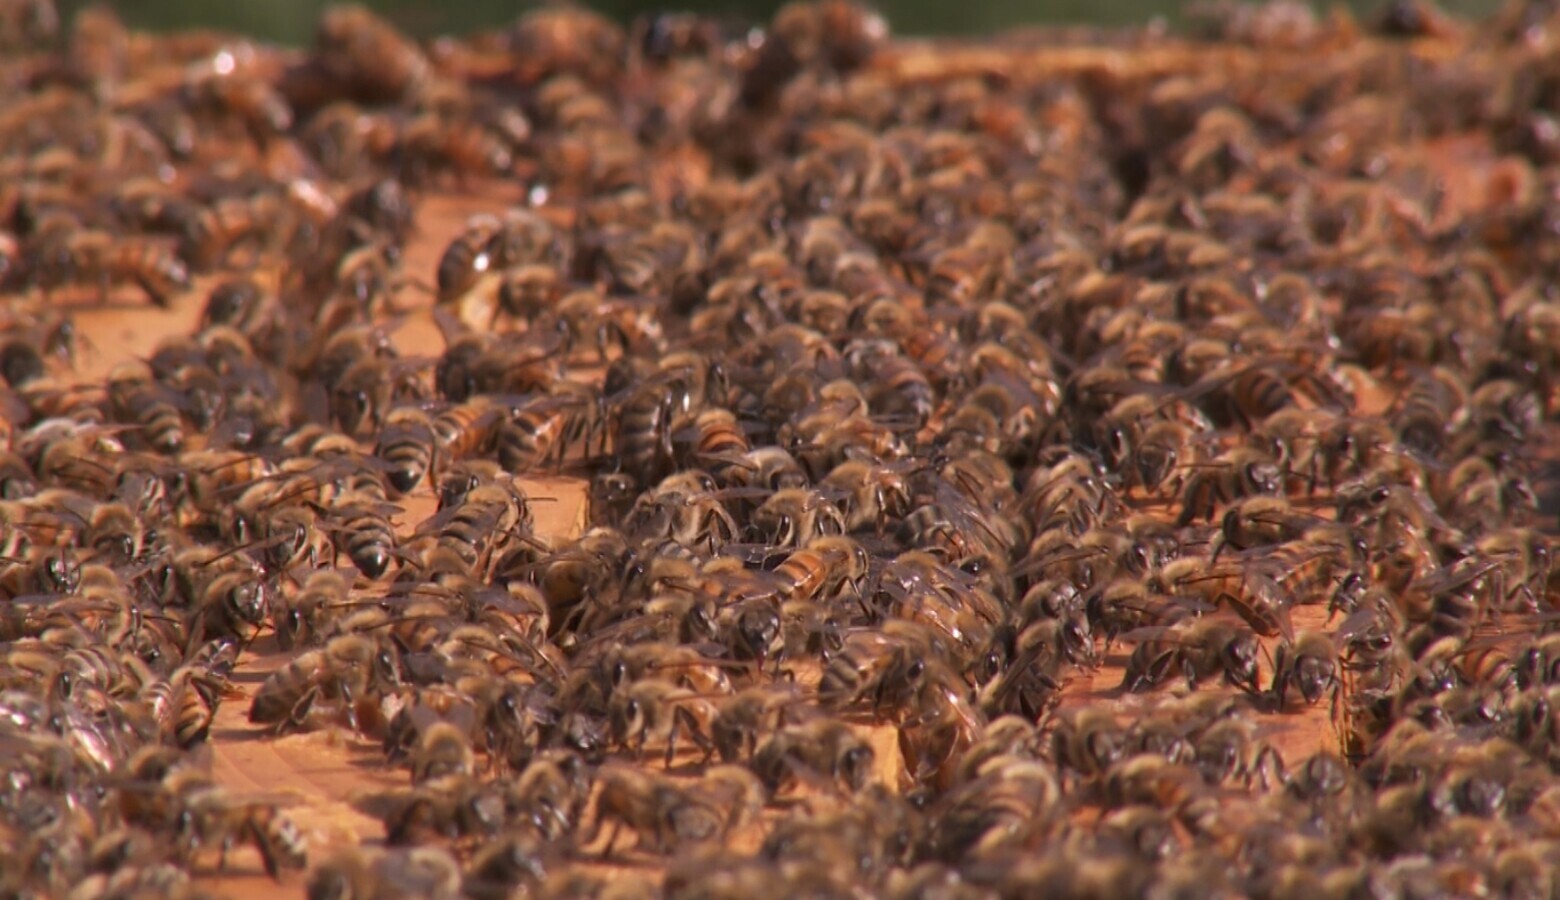 More than 40 percent of honey bee colonies in the U.S. die every year — threatening the nation’s food security. (FILE PHOTO: Seth Tackett/WTIU)